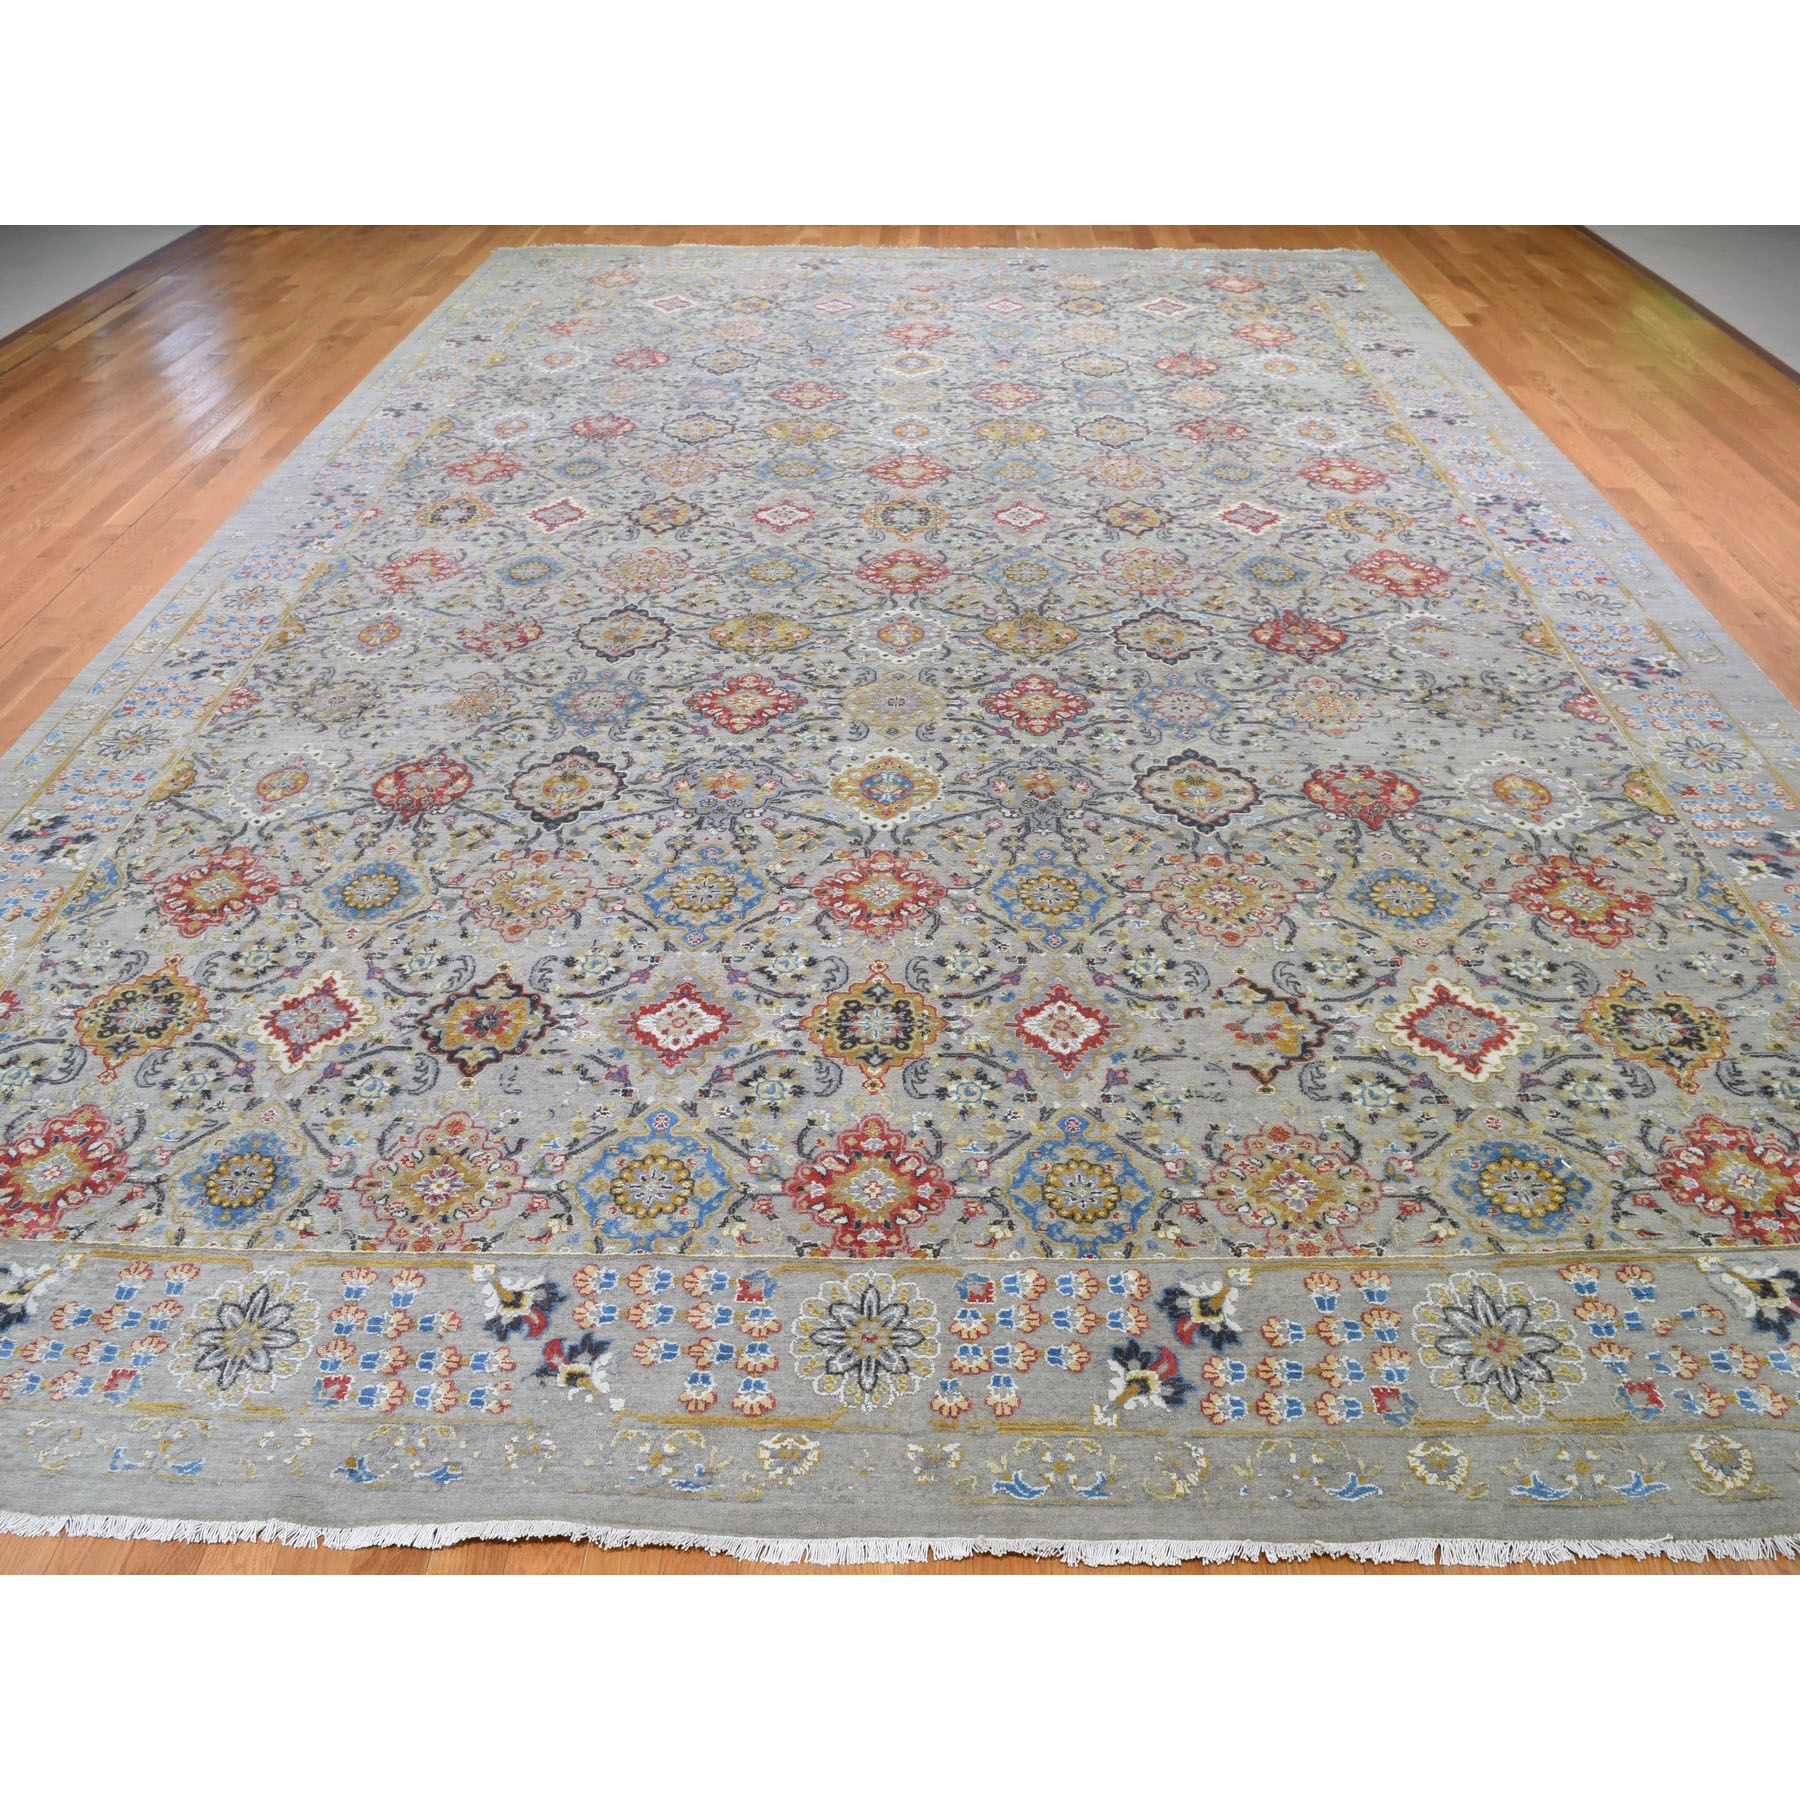 12-x18-1  Oversize THE SUNSET ROSETTES Wool & Pure Silk Hand-Knotted Oriental Rug 